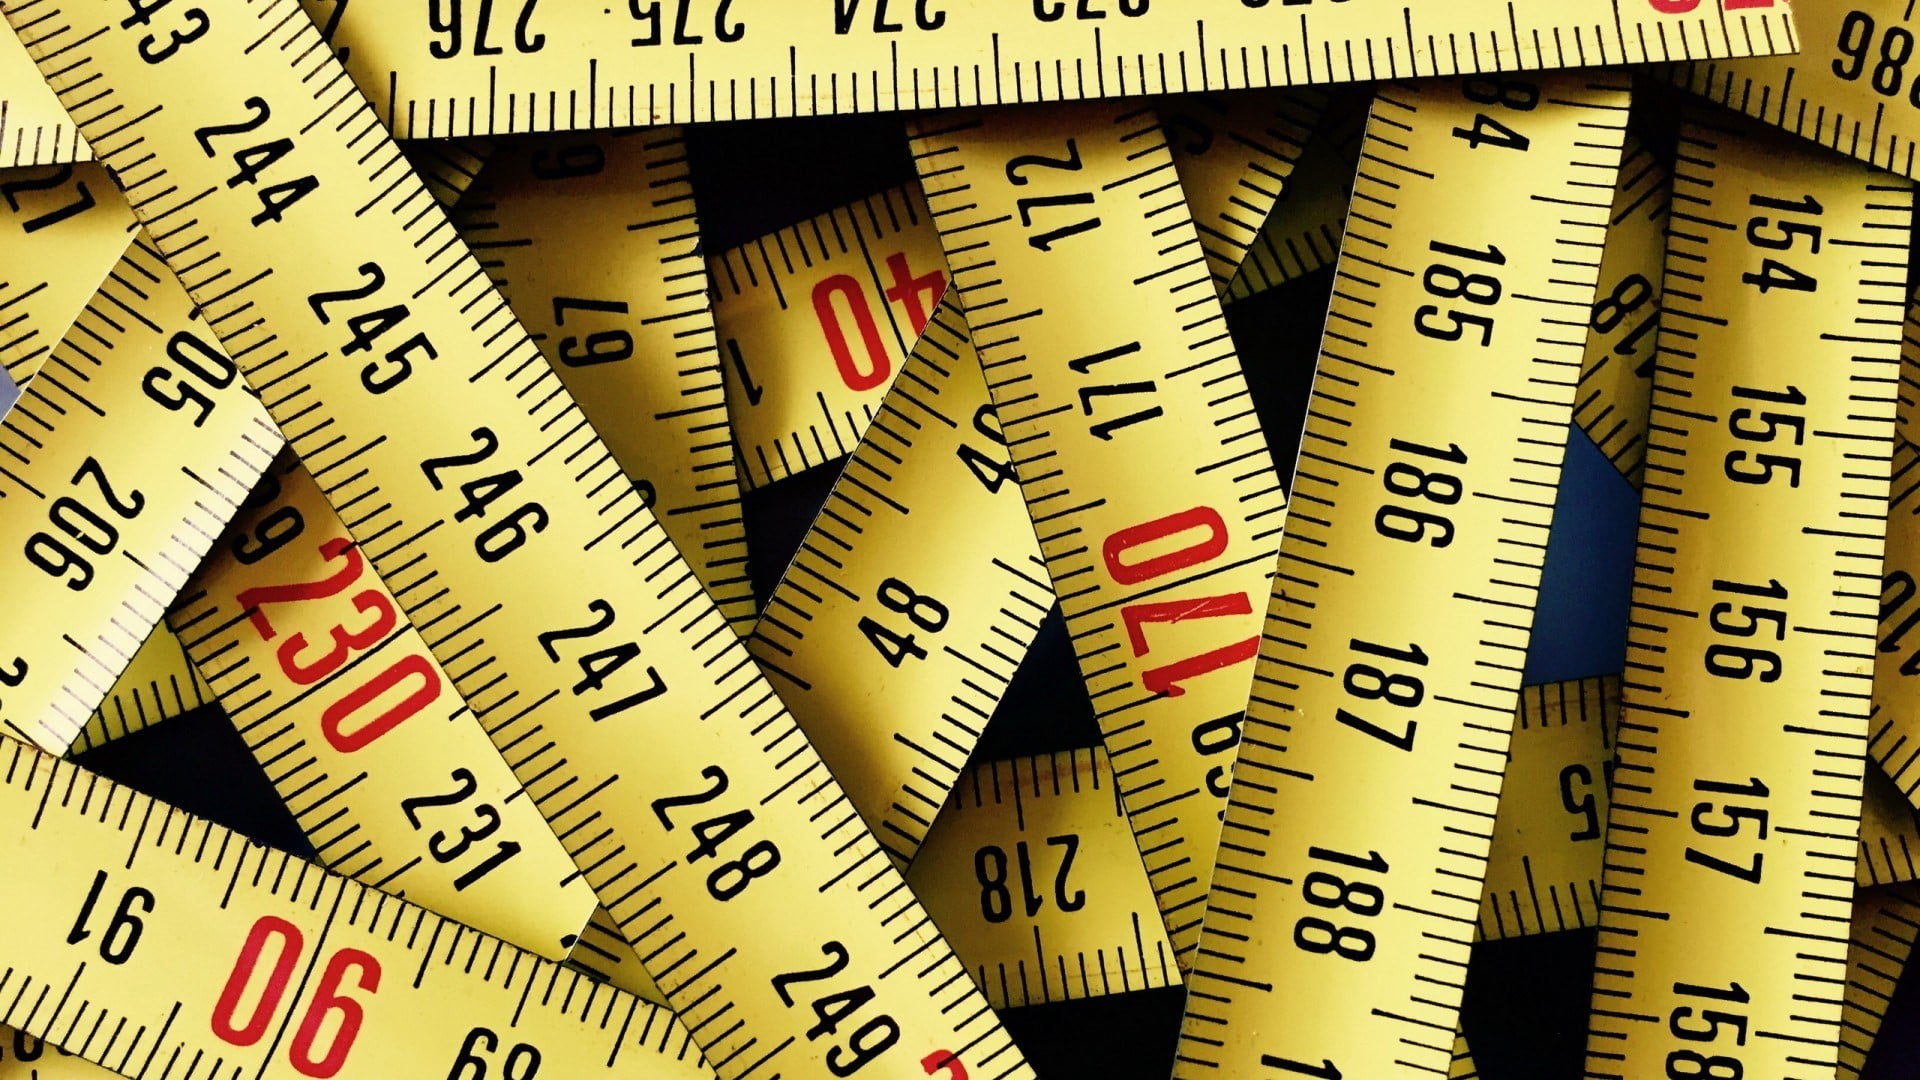 Yellow tape measure, texture, numbers